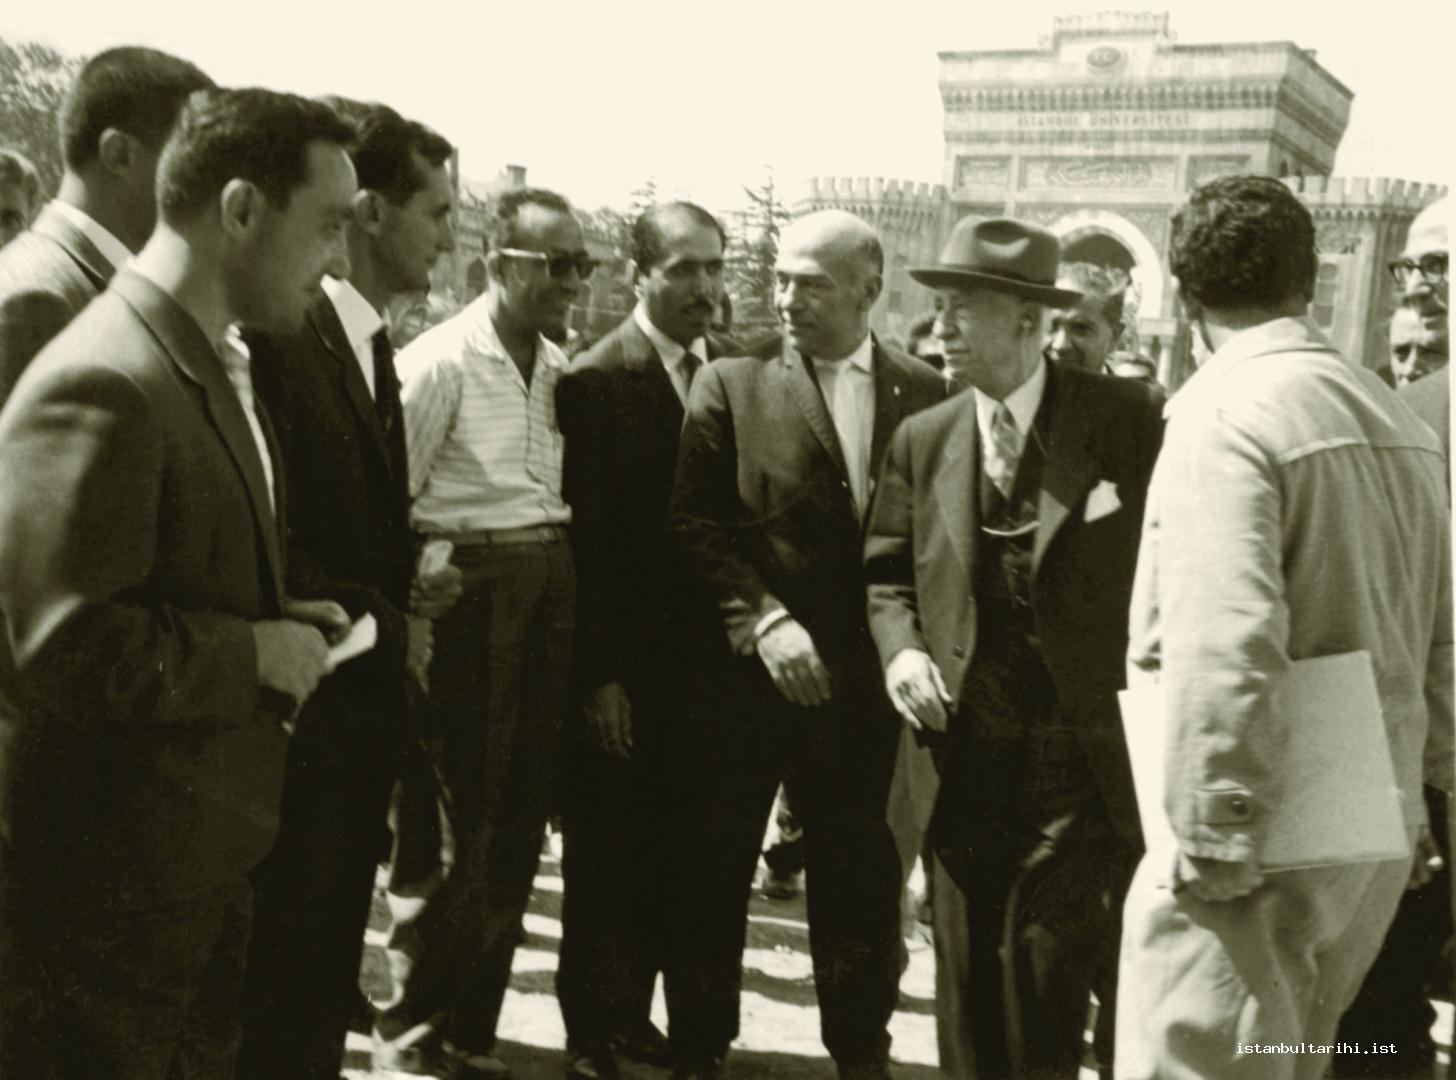 2- A scene from briefing Prime Minister İsmet İnönü by the authorities when he  visited Istanbul during the days of Beyazıt Square pedestrianization project. The   fifth person from the left is Turgut Cansever who was the architect of the project.